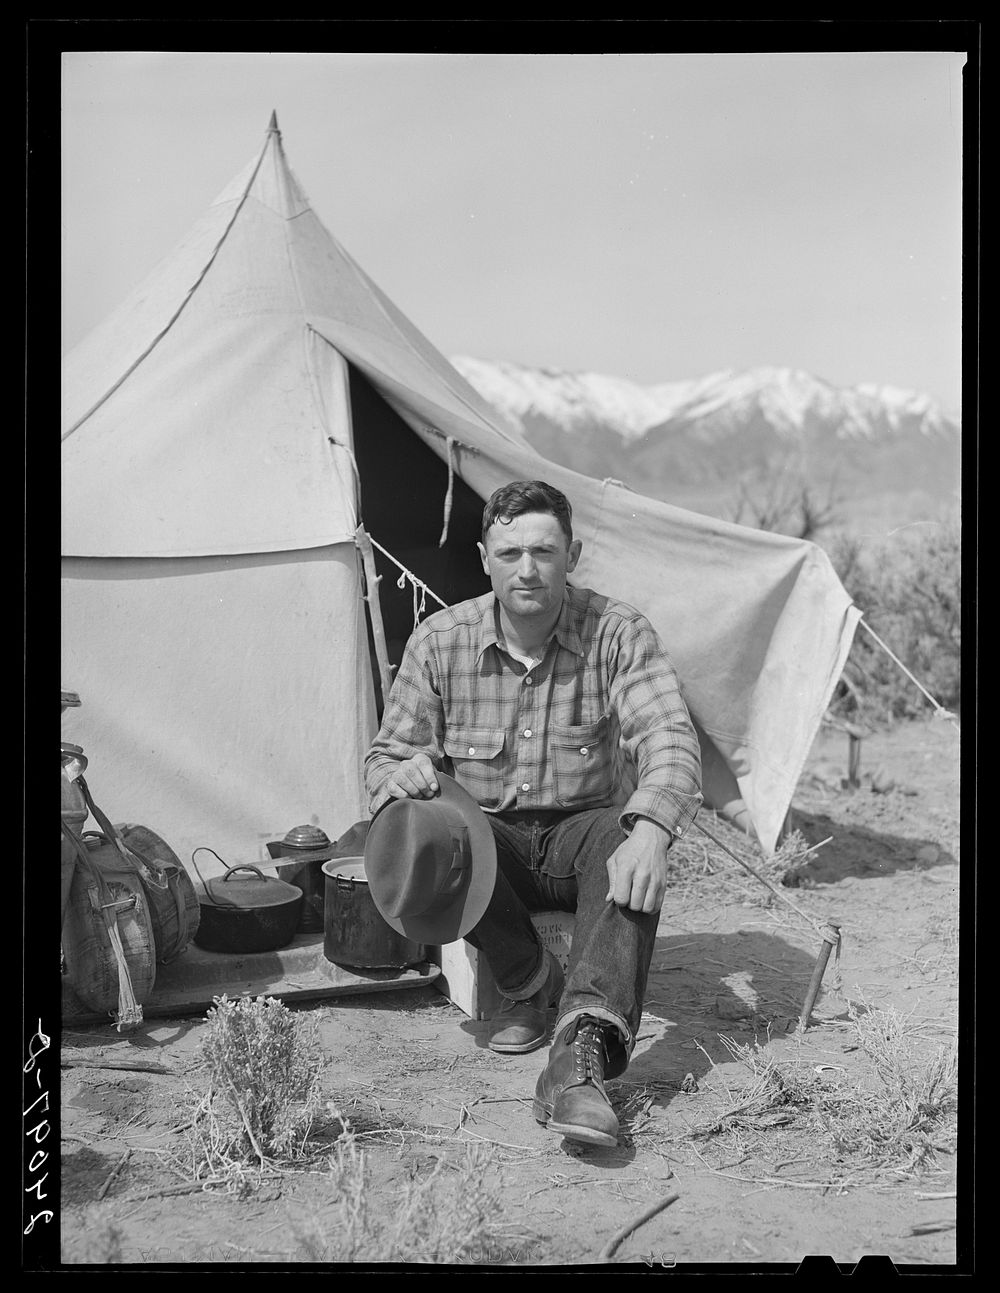 Basque sheepherder. Dangberg Ranch, Douglas County, Nevada. Sourced from the Library of Congress.